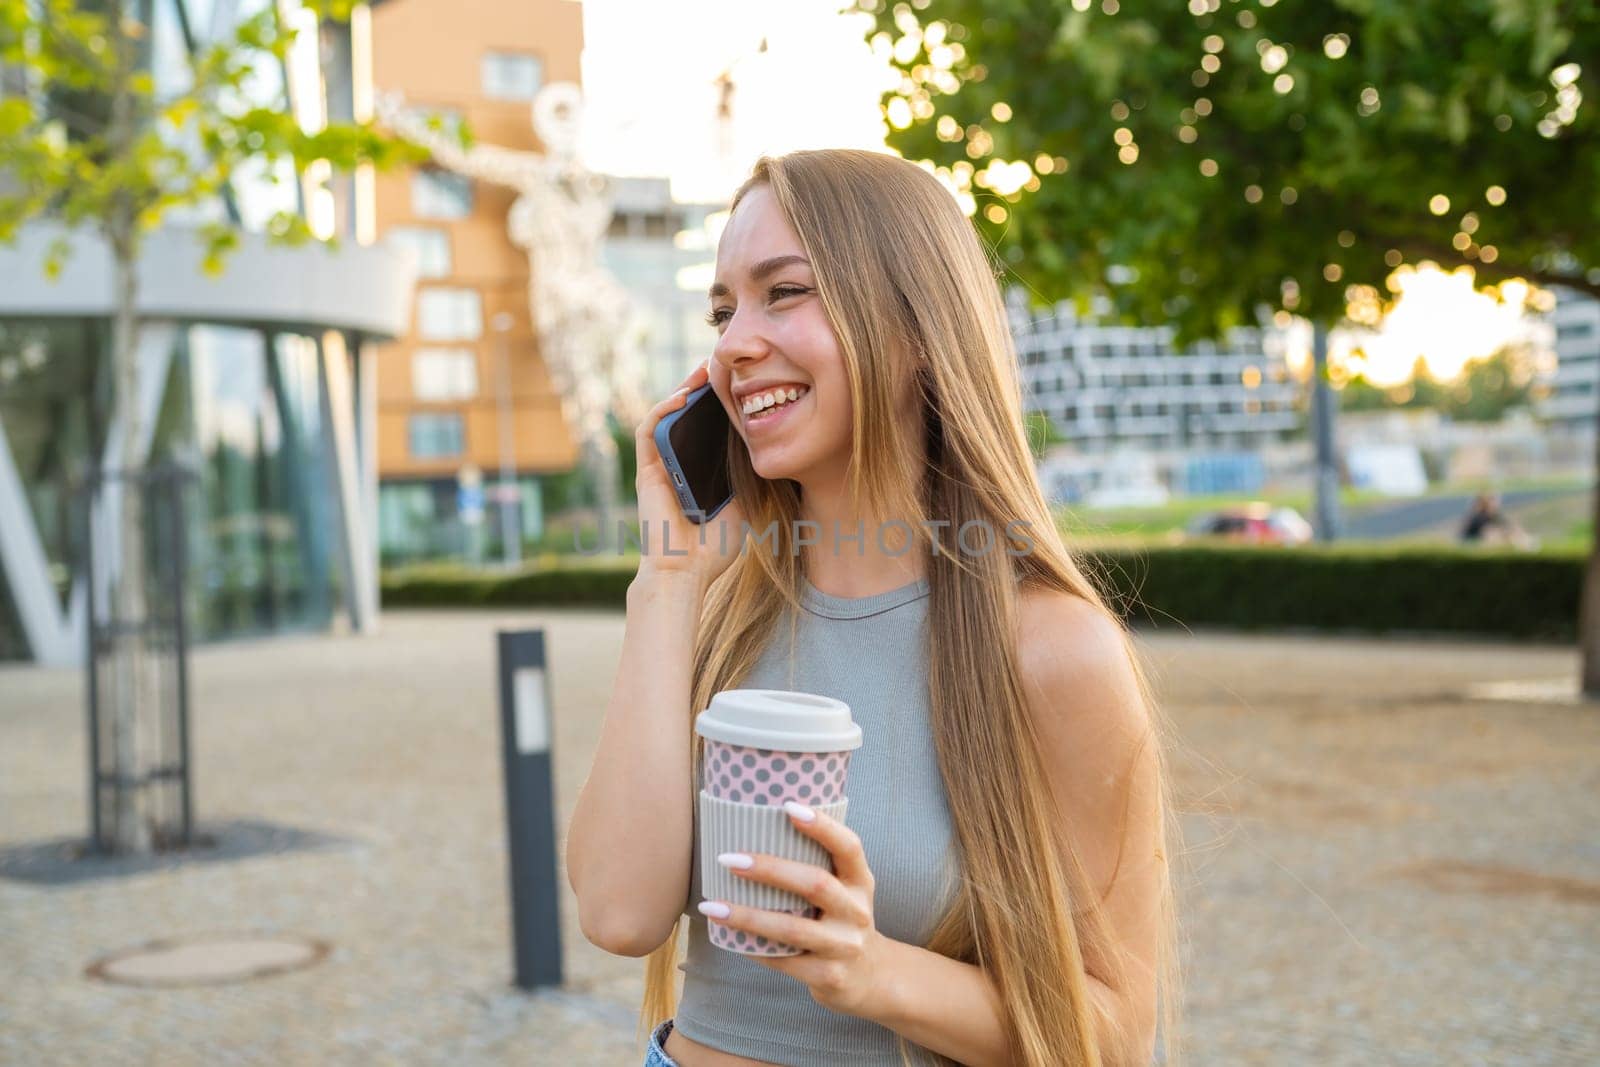 Cheerful young woman with coffee cup in hand laughs talking on phone with boyfriend. Lady spends time drinking coffee in city park after work